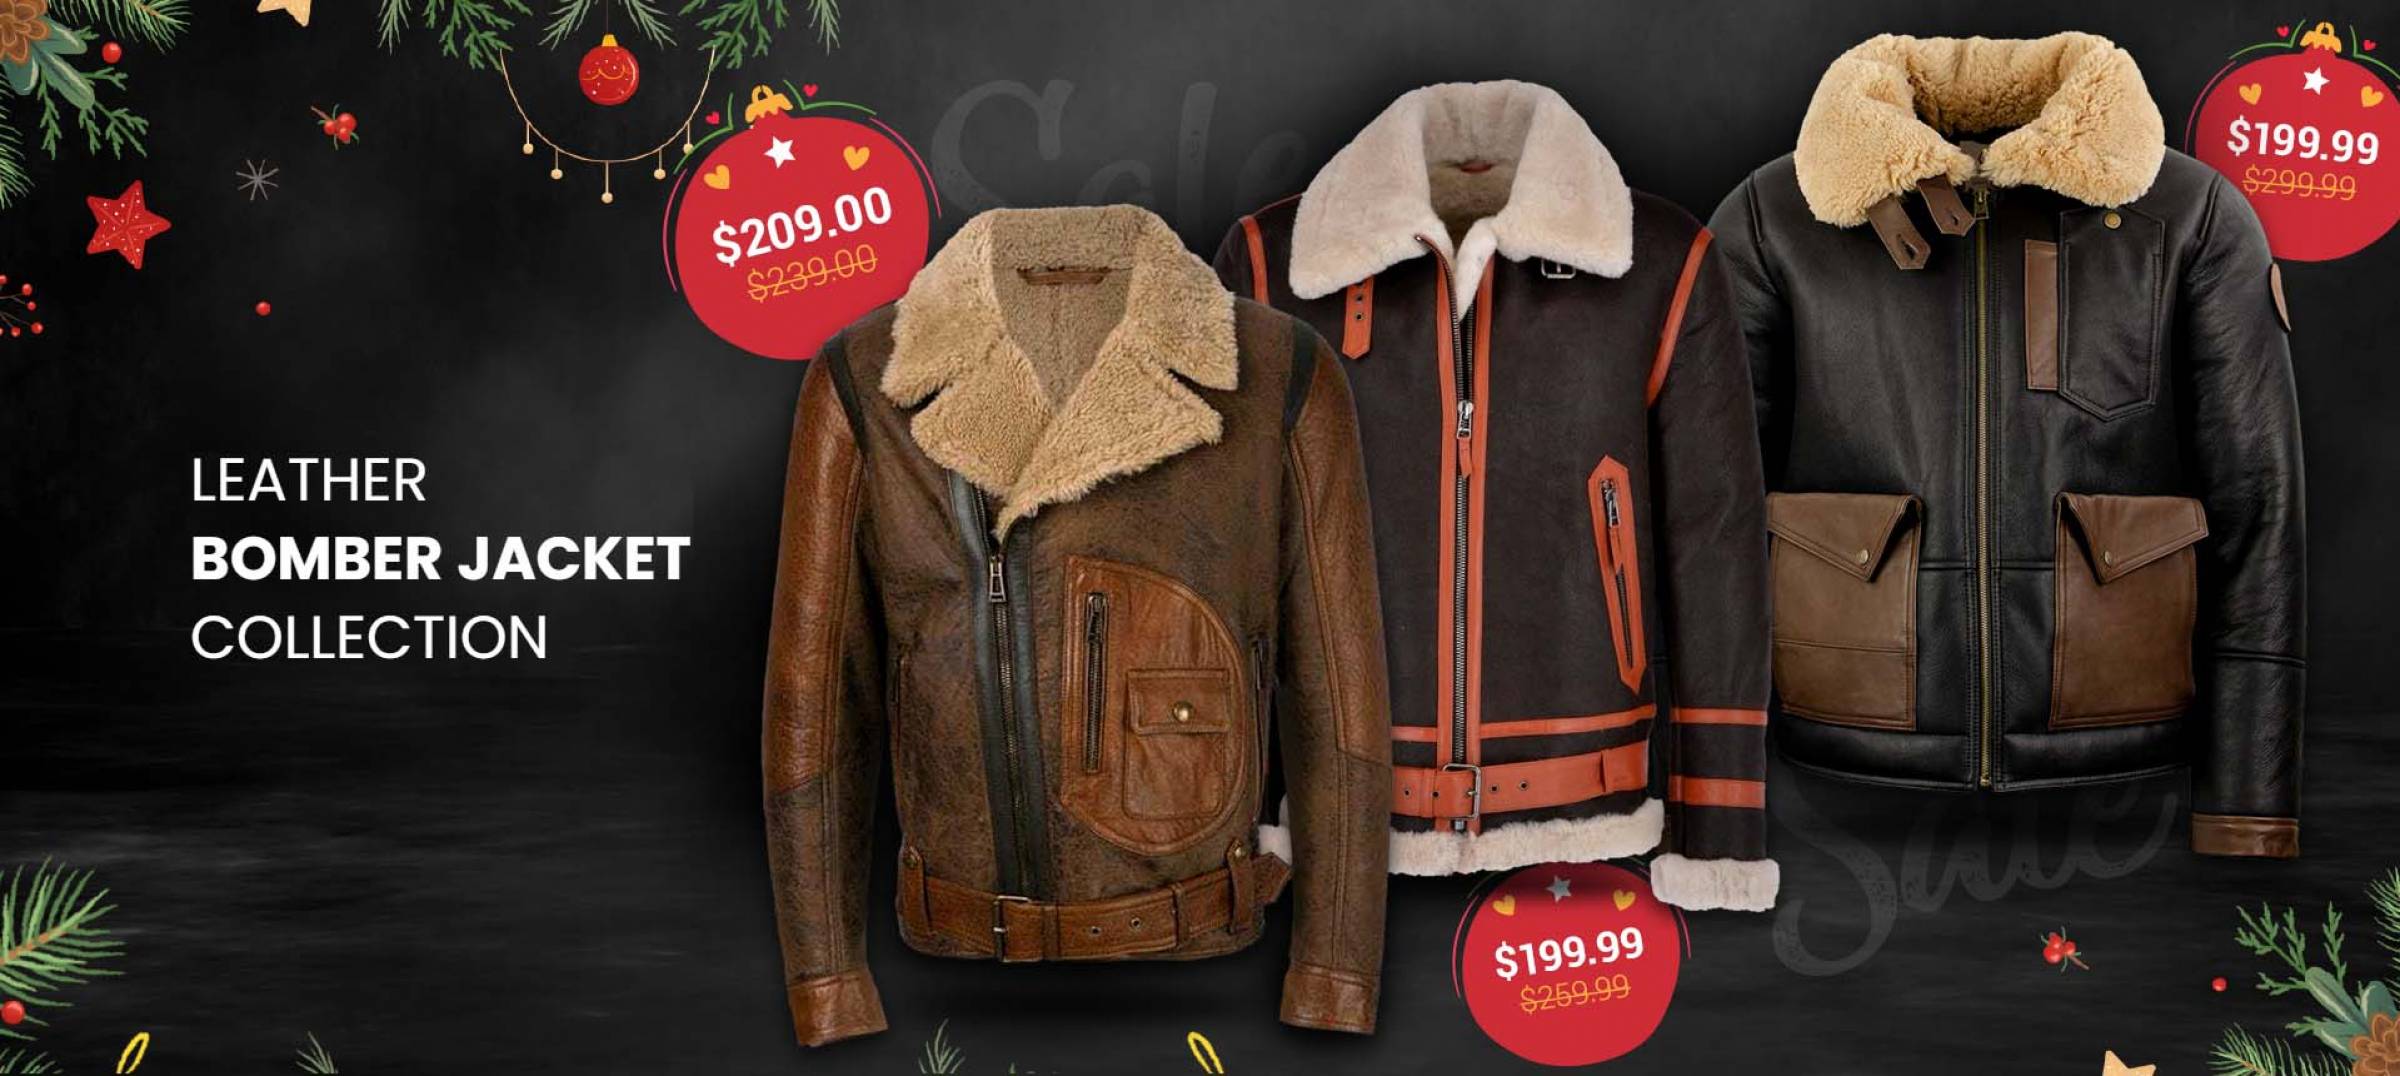 Leather Fashion Jackets & Motogp Racing Apparel Online Store